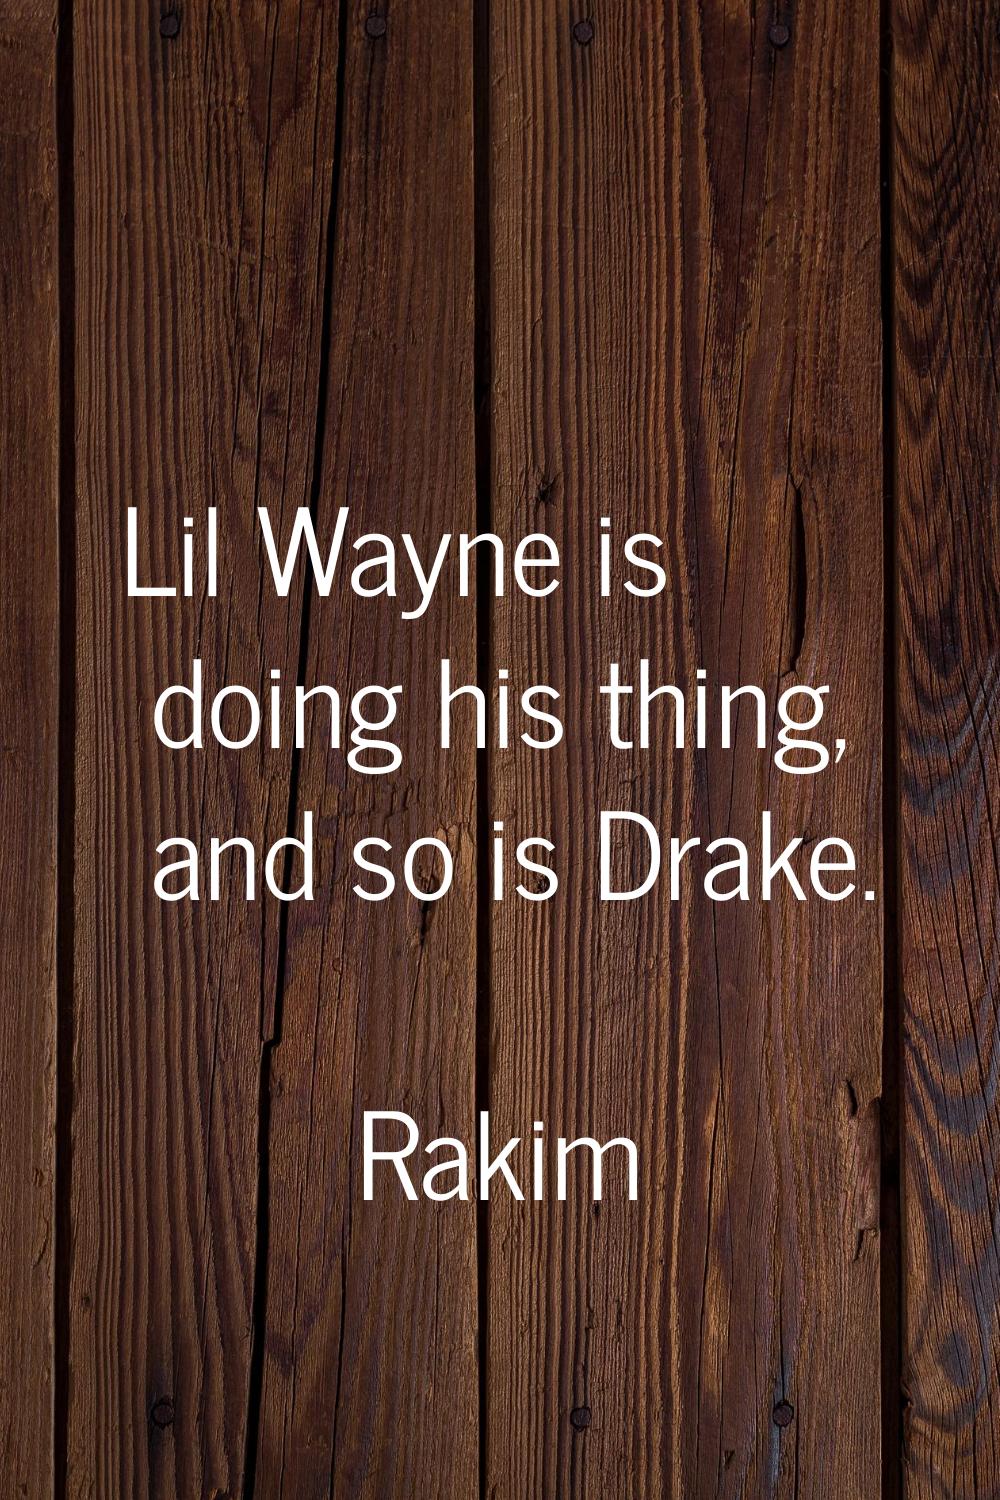 Lil Wayne is doing his thing, and so is Drake.